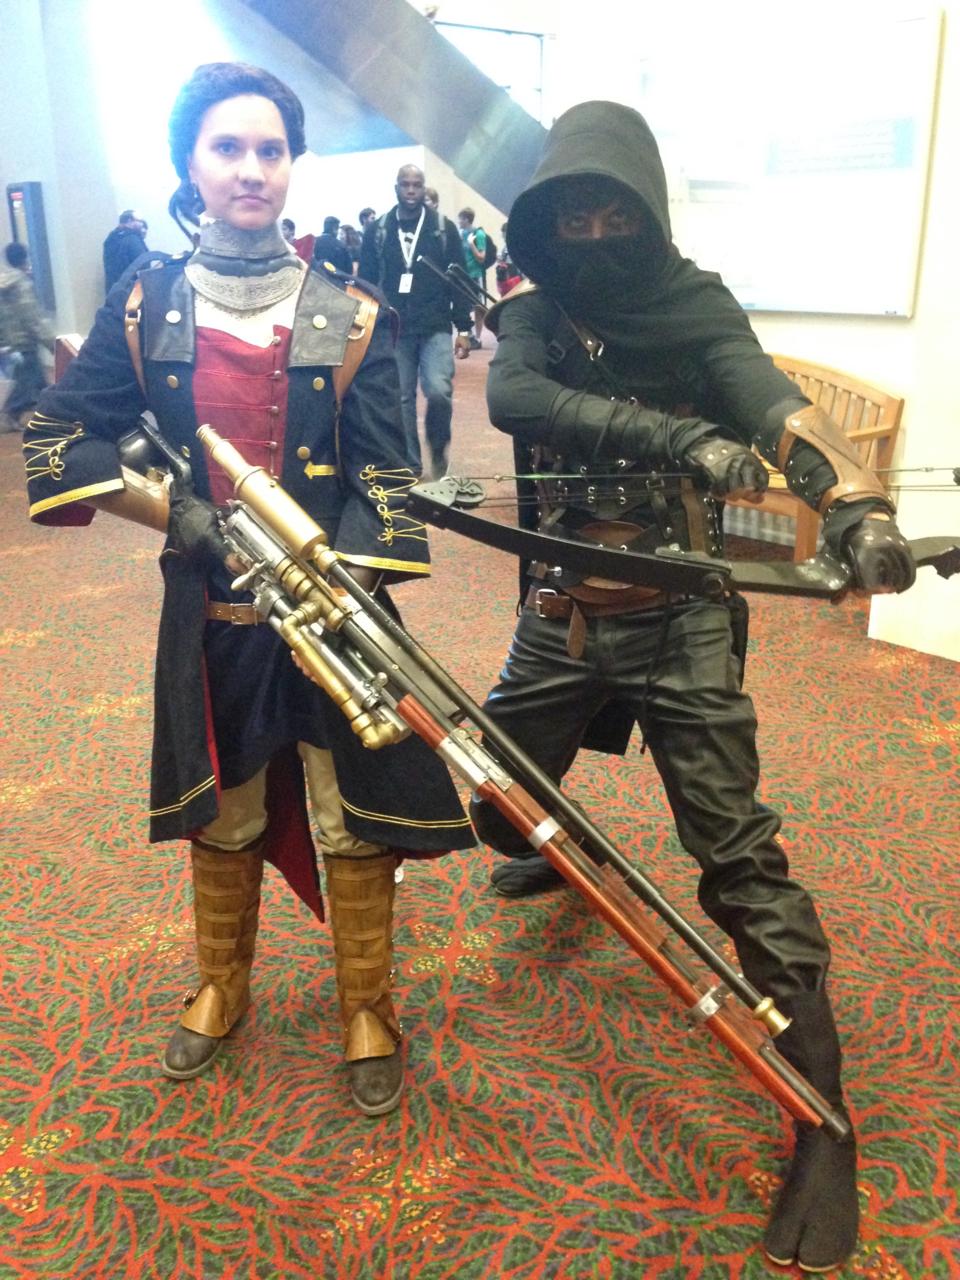 Some impressive The Order: 1886 and Thief cosplay.